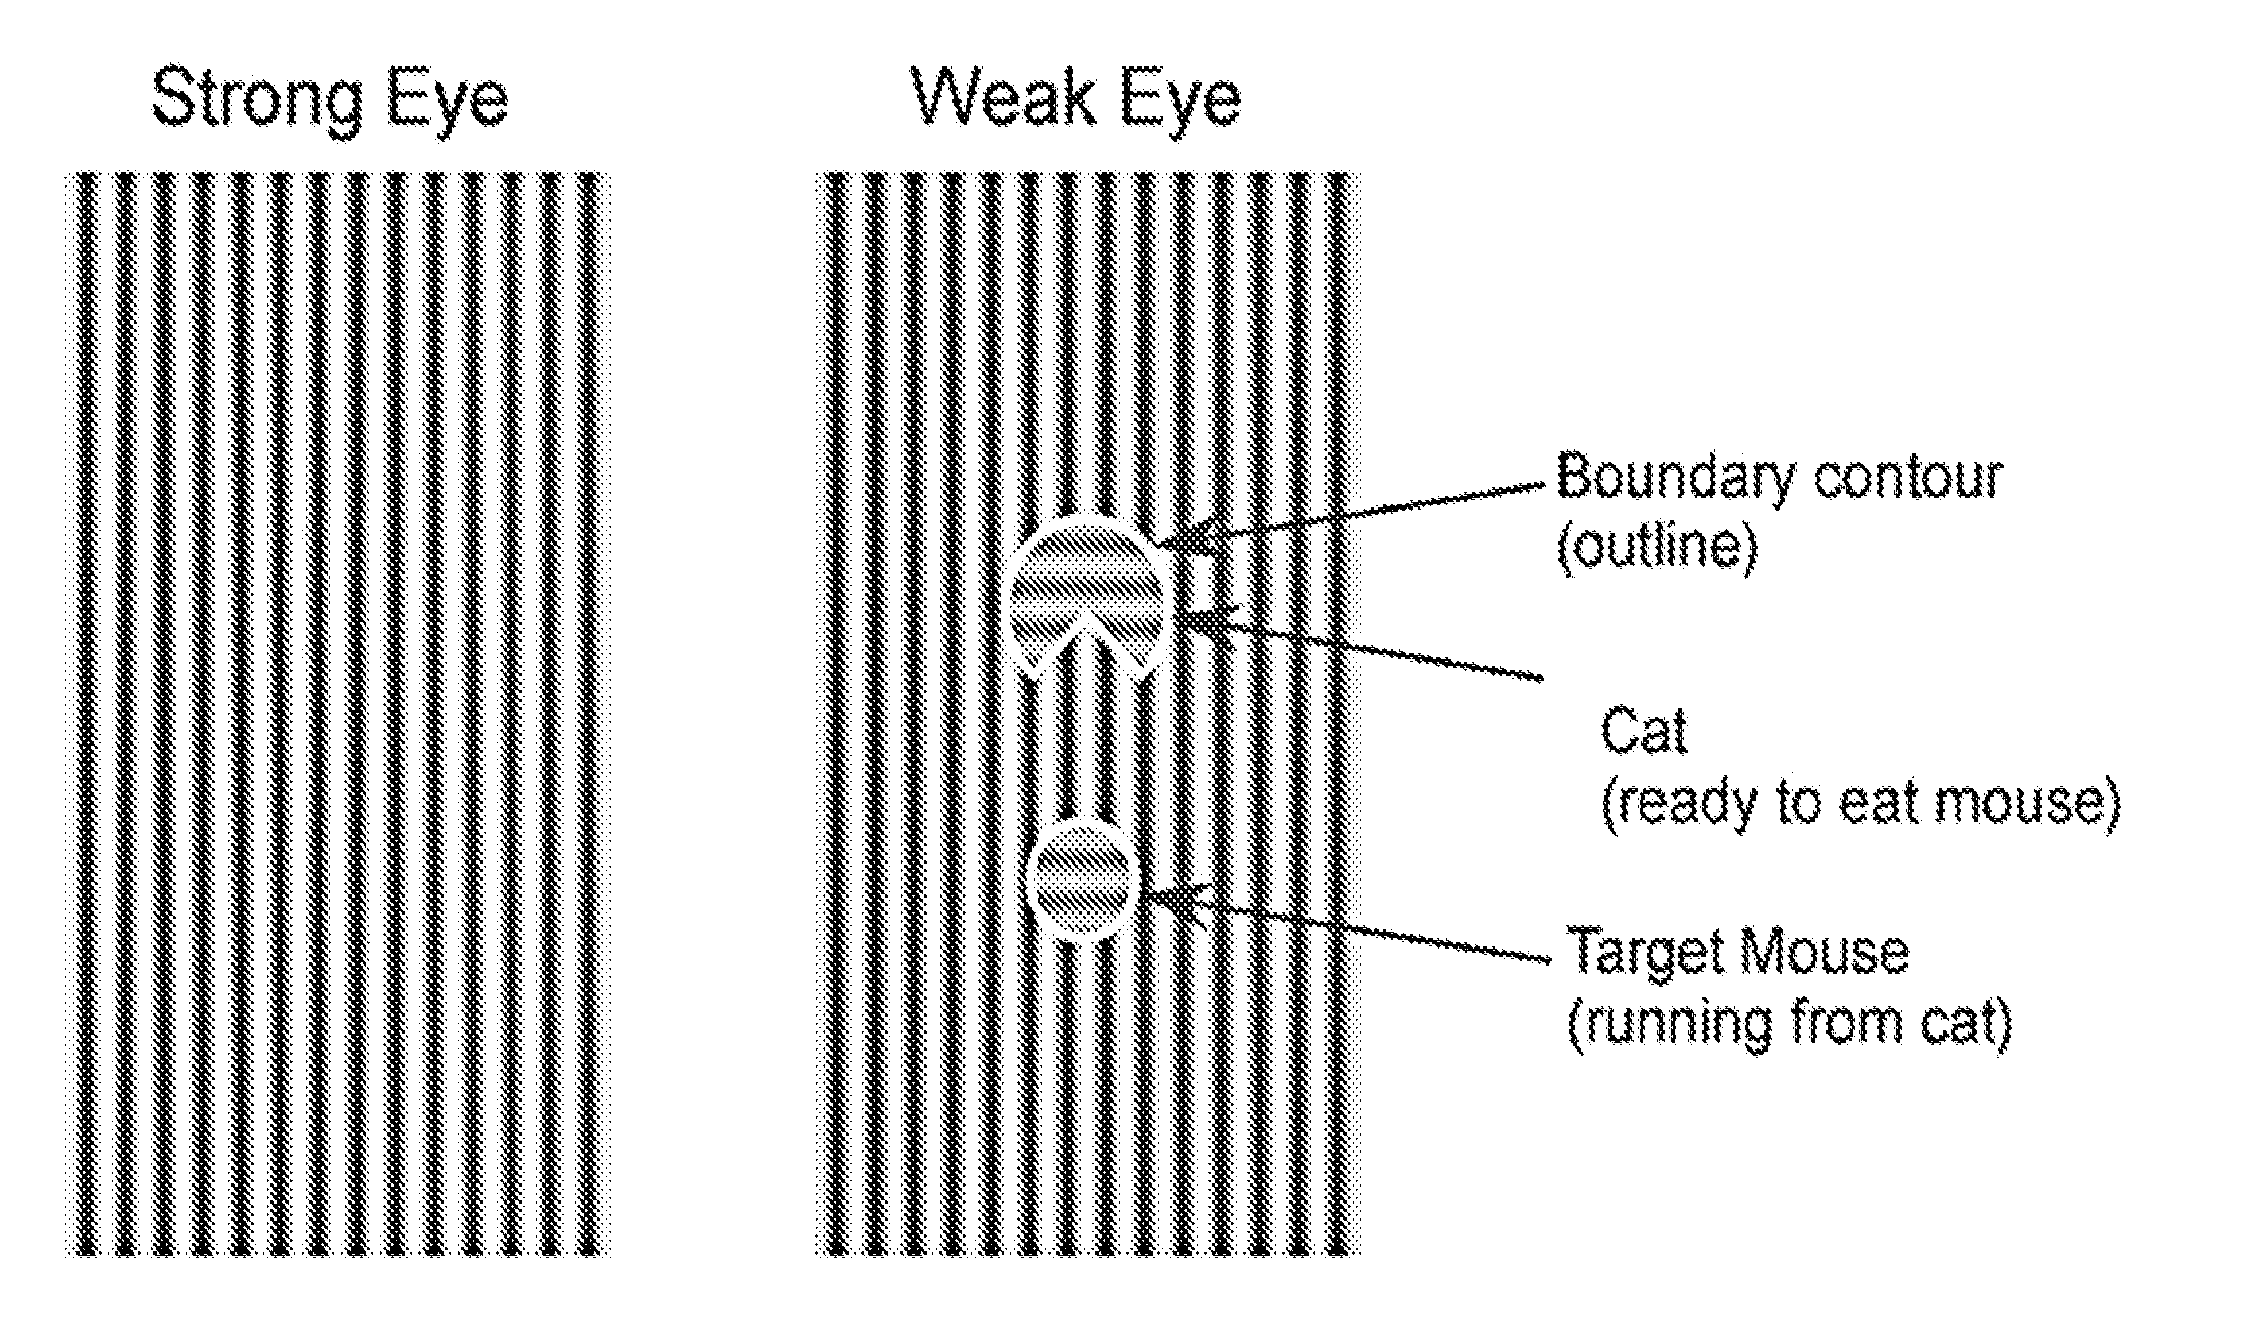 Systems and methods for improving sensory eye dominance, binocular imbalance, and/or stereopsis in a subject